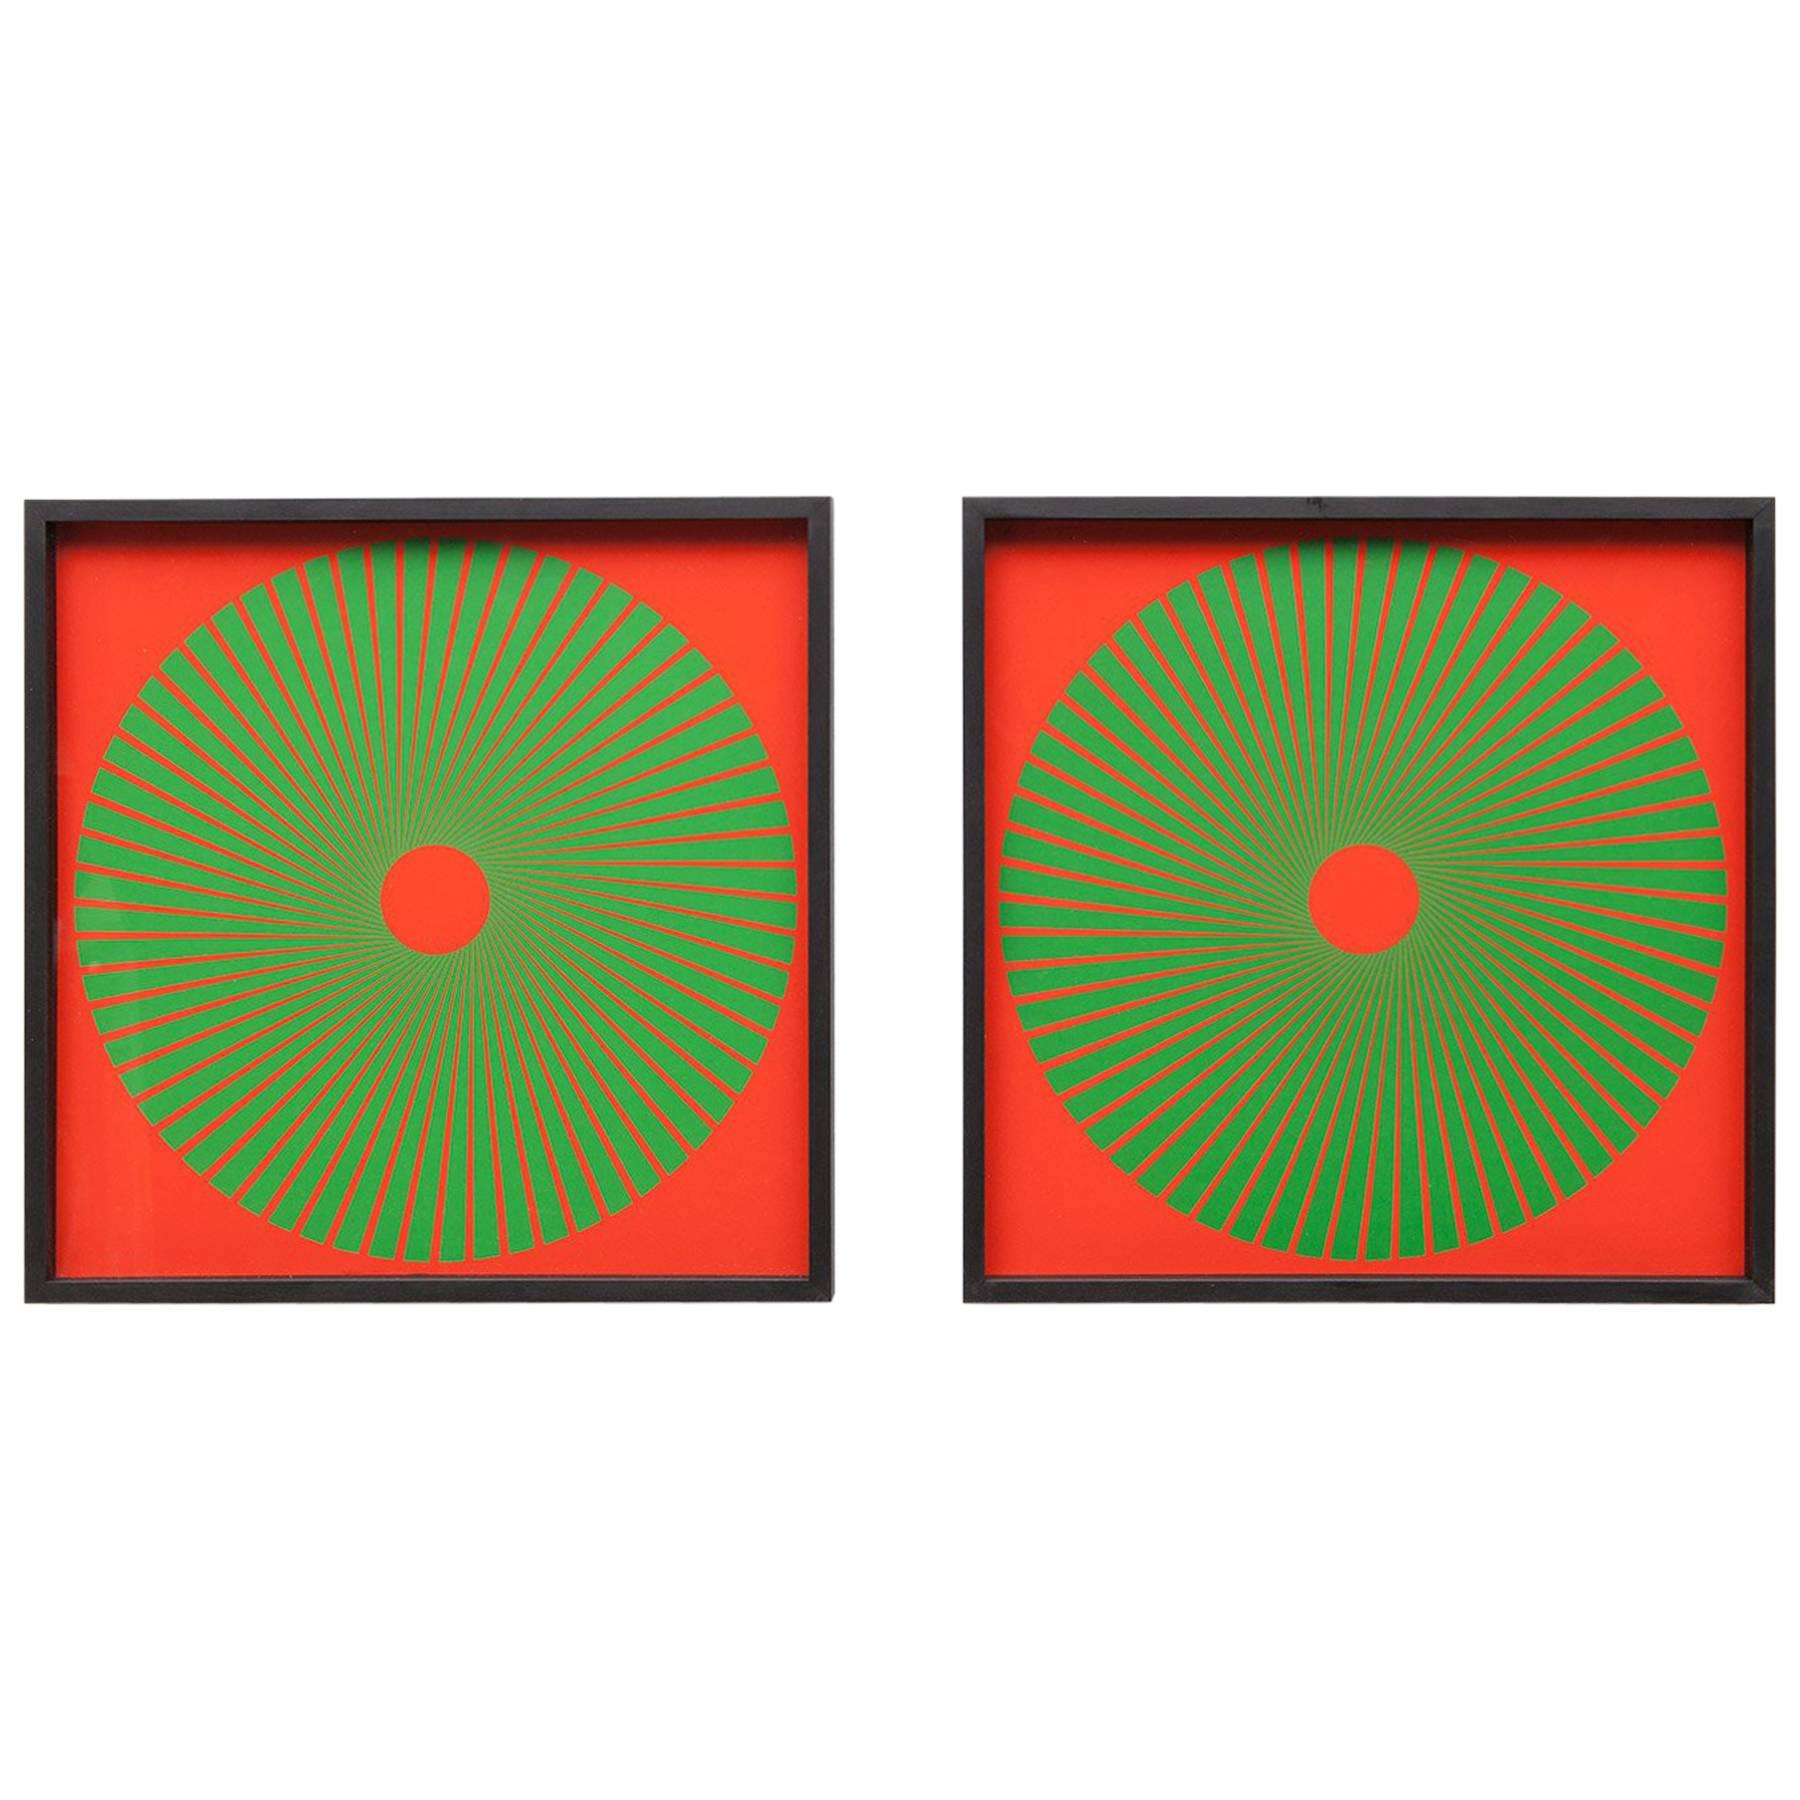 Pair of Wolfgang Ludwig screenprints in red and green